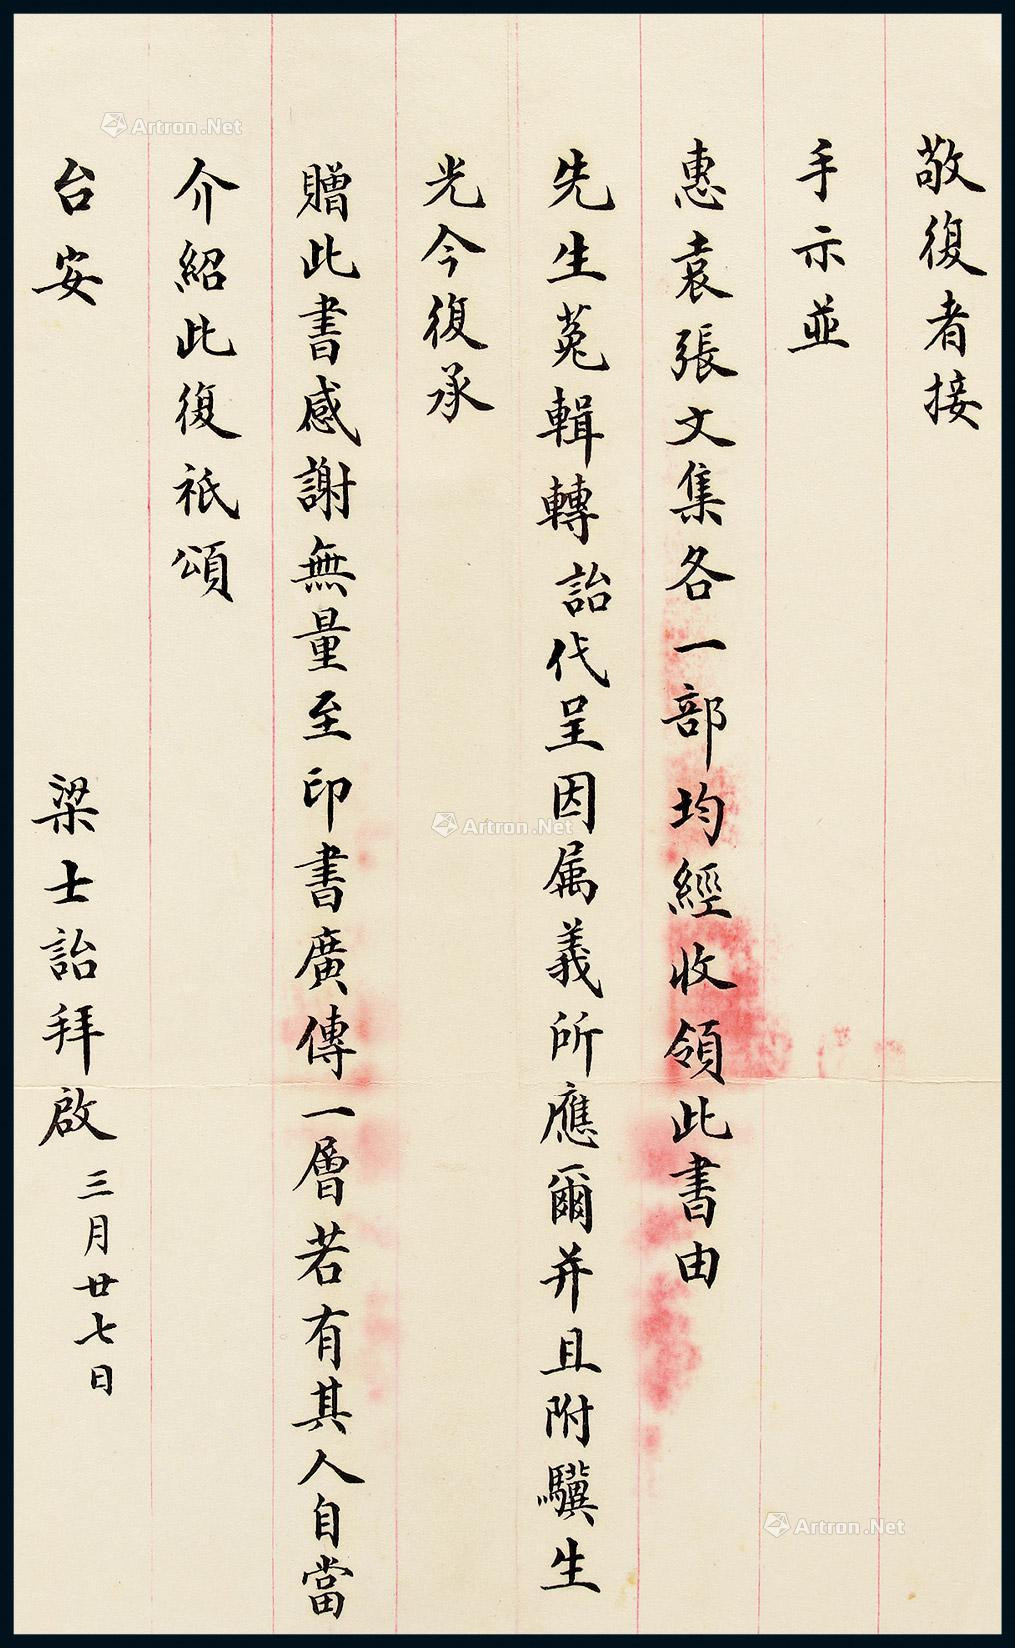 One letter of one page by Liang Shiyi